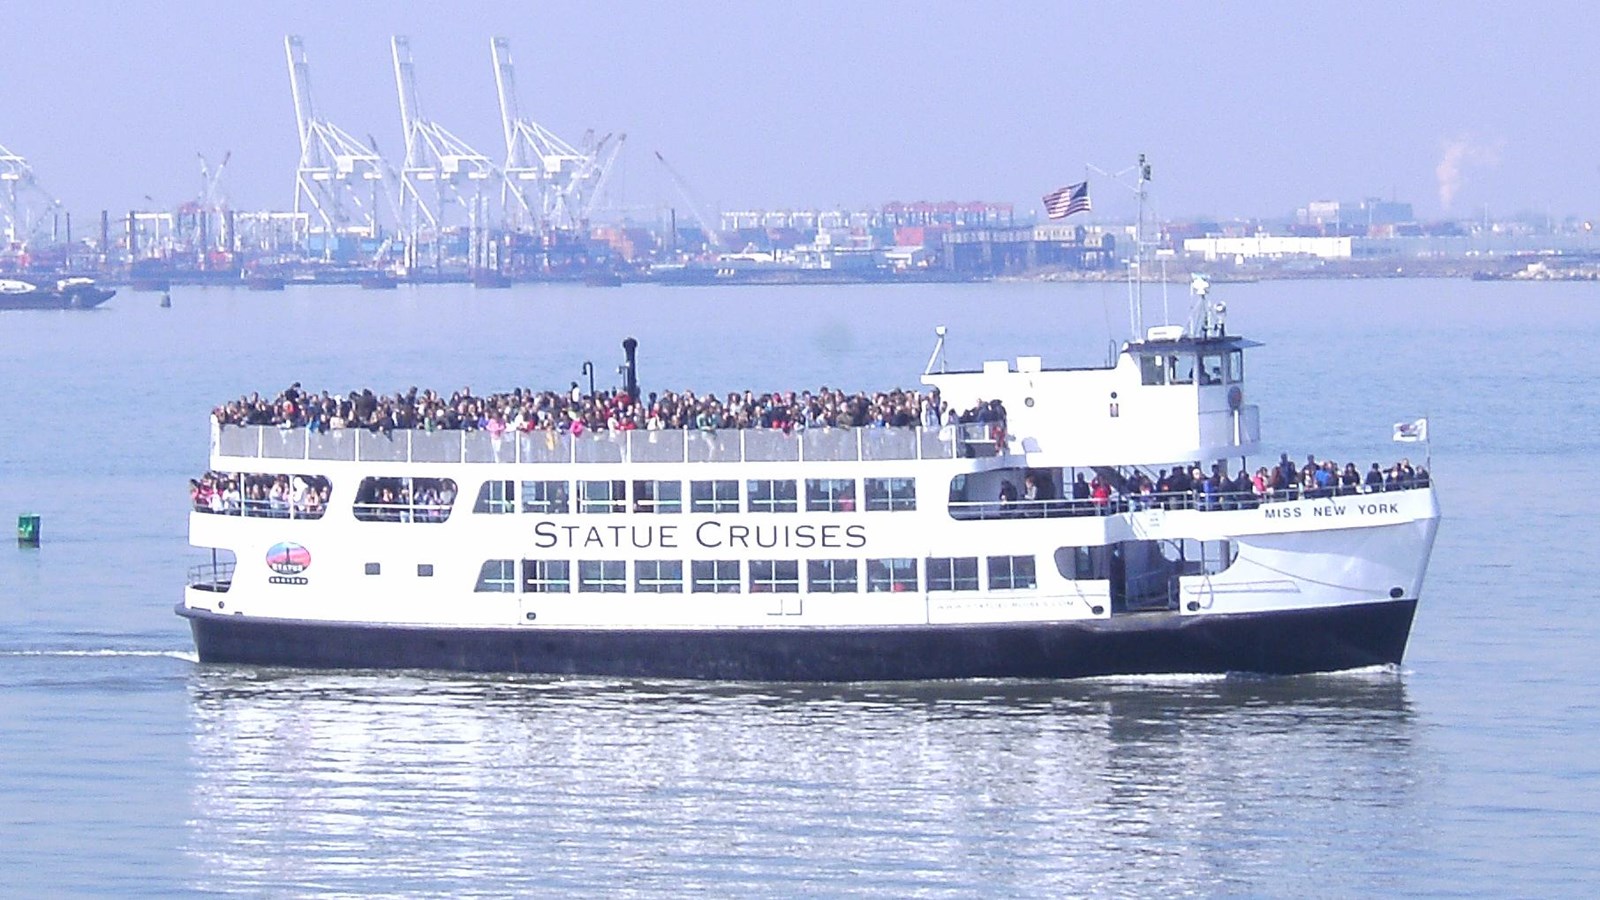 Ferry showing hundreds of visitors in New York Harbor